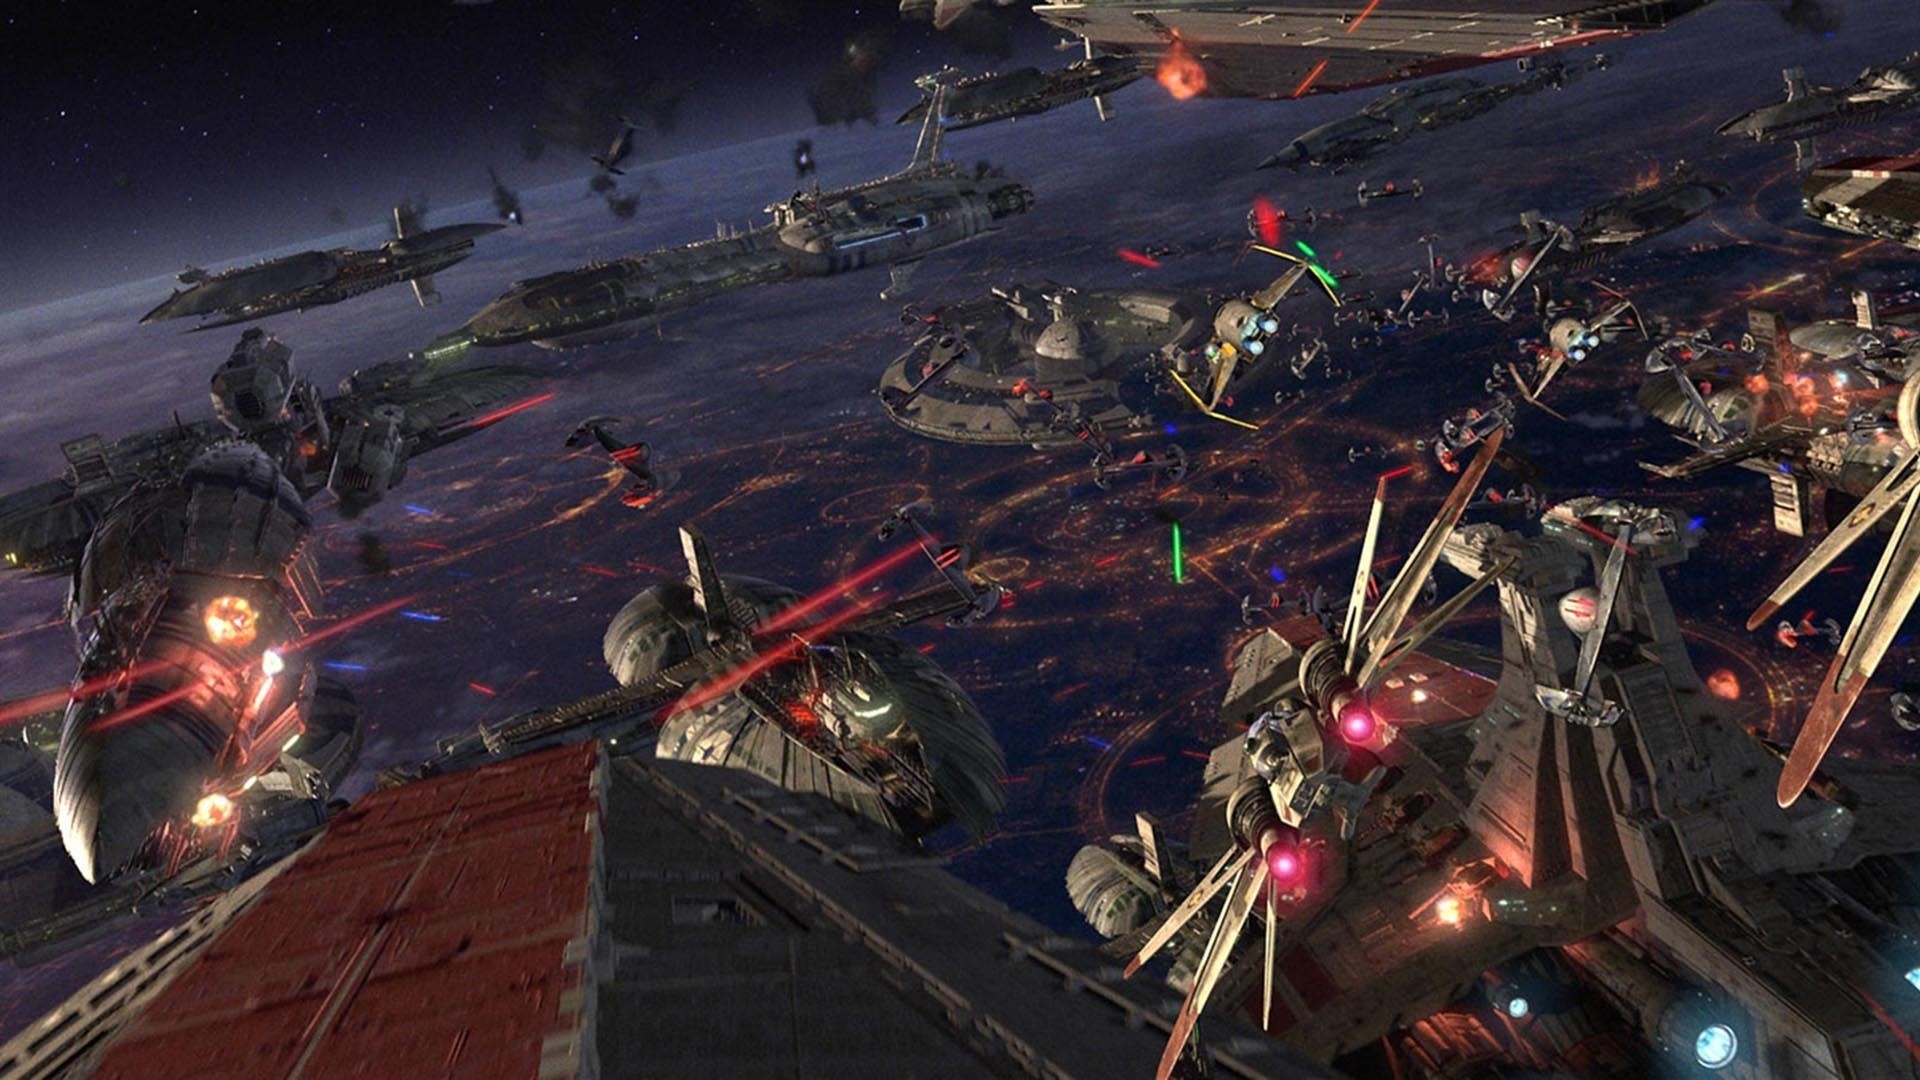 1920x1080 Star Wars Episode III Revenge of the Sith sci-fi battle spaceship space  wallpaper |  | 145616 | WallpaperUP